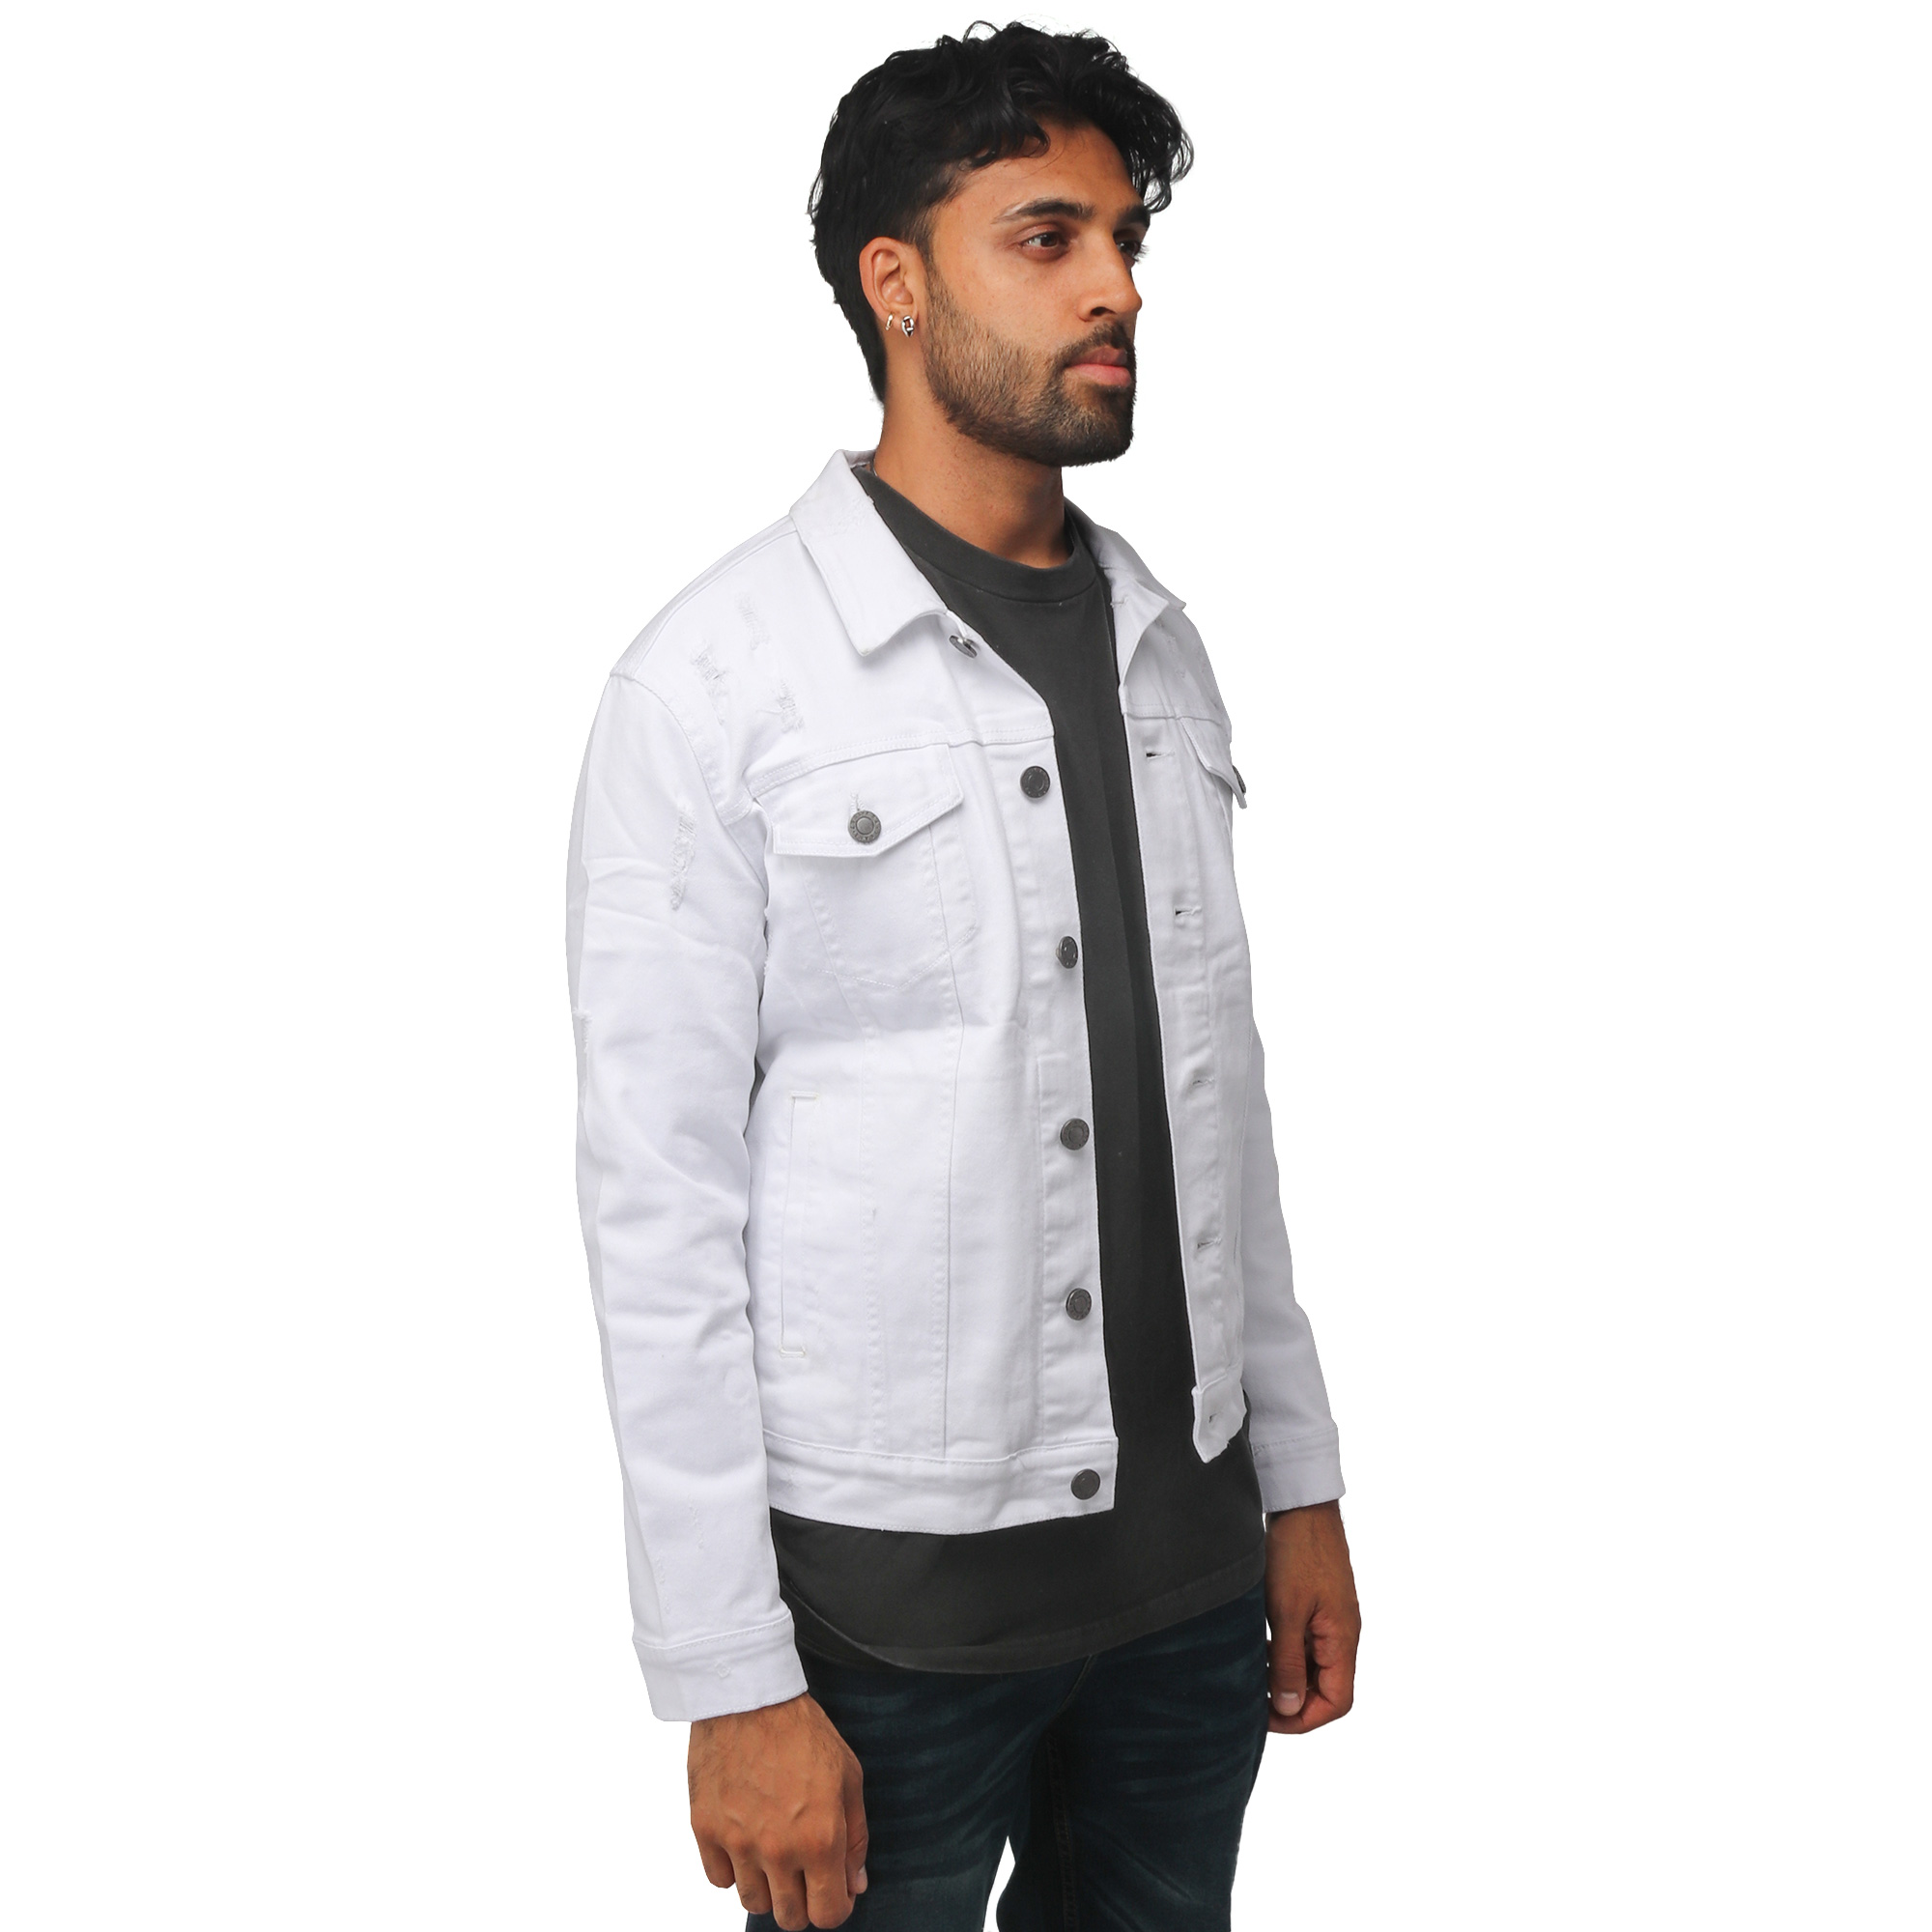 X RAY Men's Denim Jacket, Washed Ripped Distressed Flex Stretch Casual Trucker Biker Jean Jacket, White - Ripped, Medium - image 2 of 9